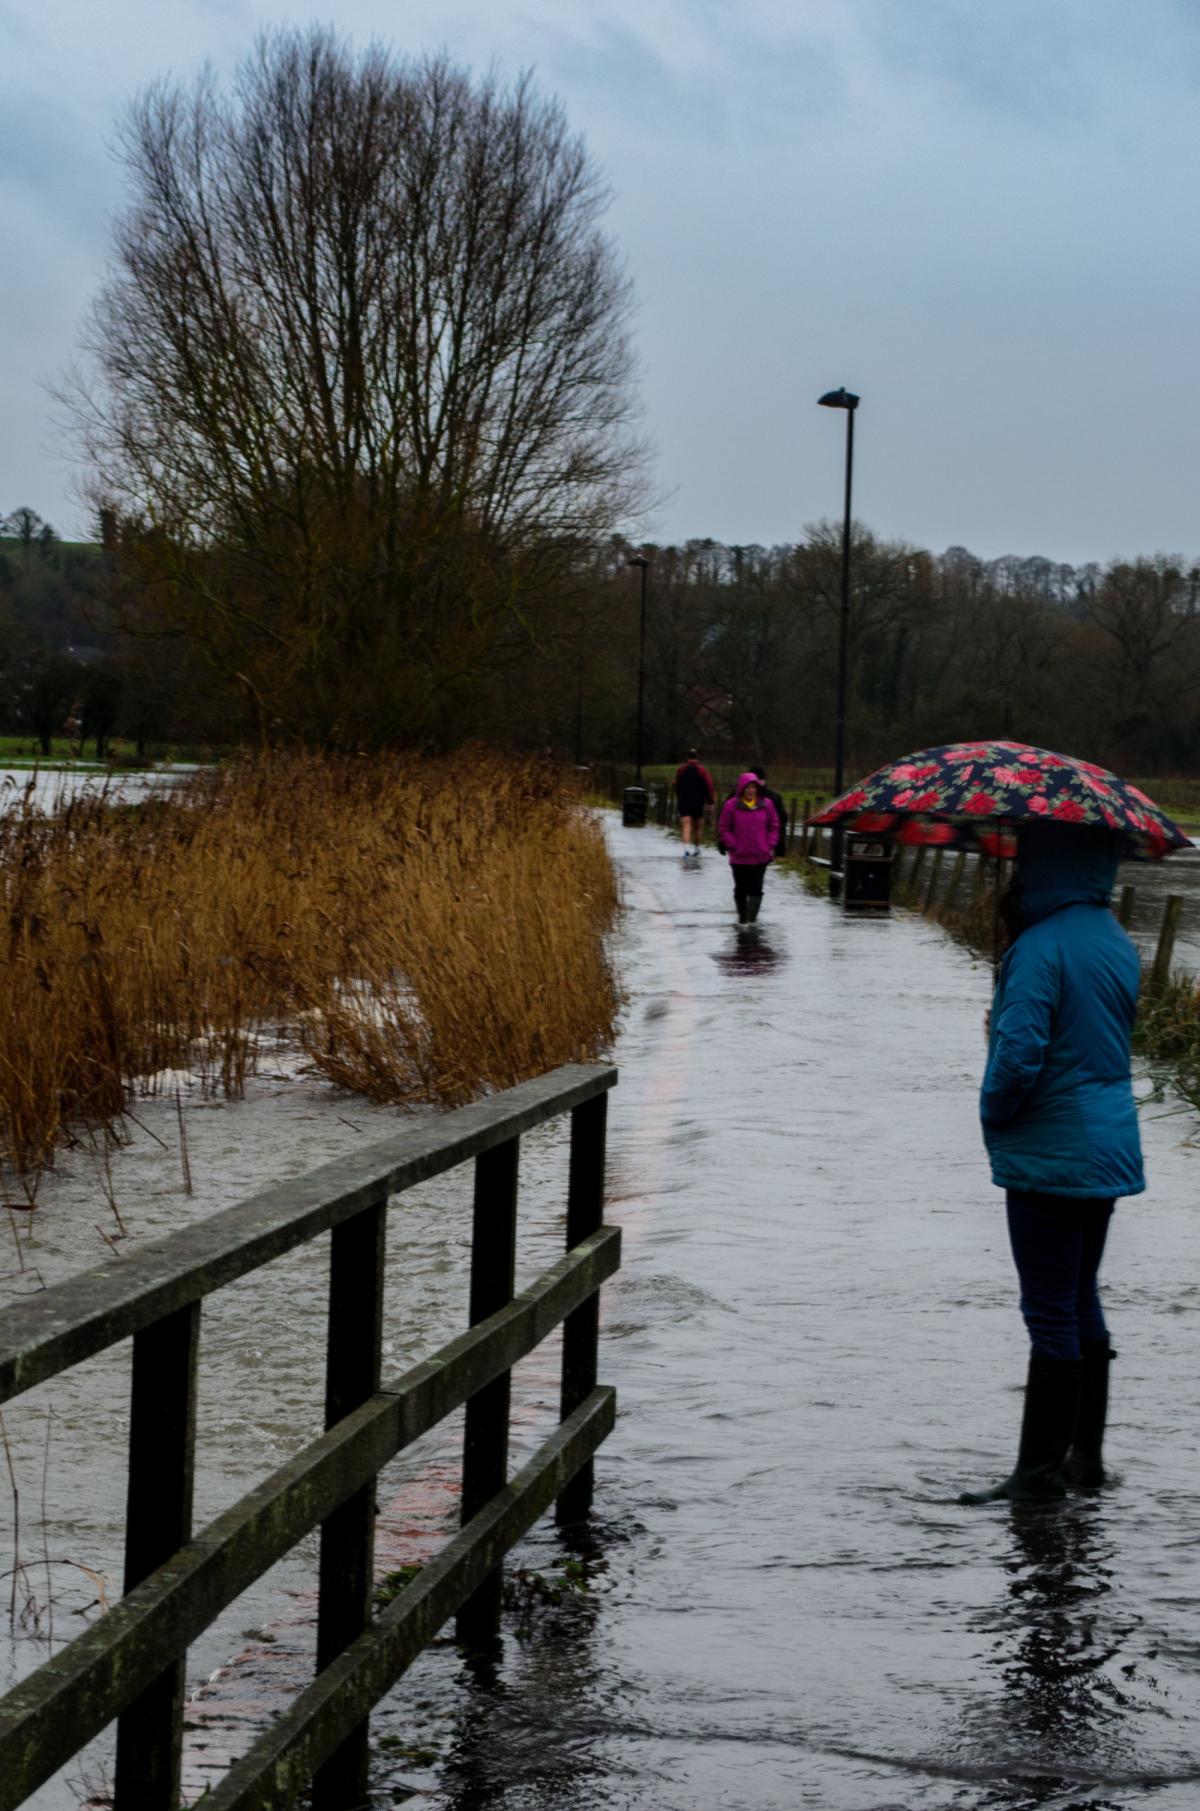 Wellies are definitely needed for Salisbury's Town Path. By Graham Tarrant